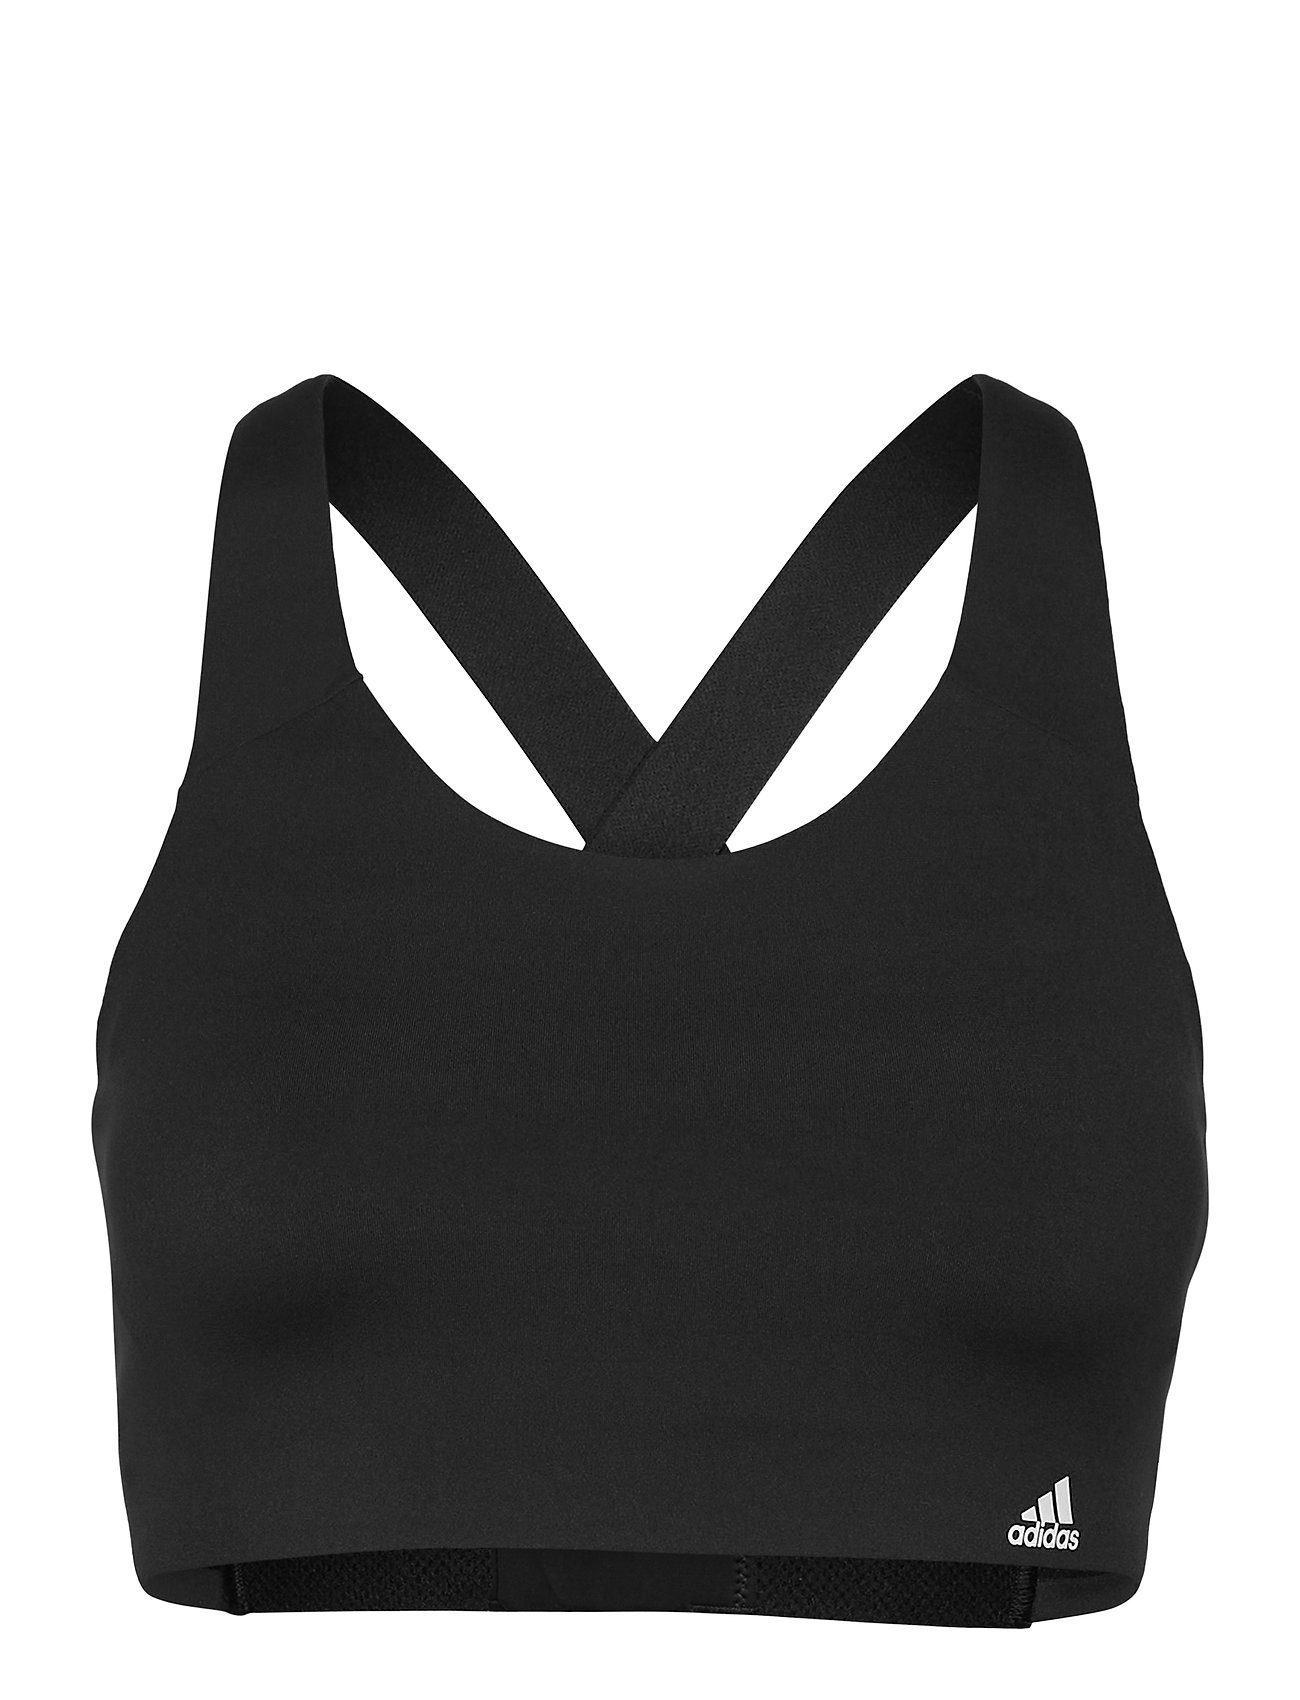 NWT Women's Adidas Sports Adjustable Ultimate Bra High Support